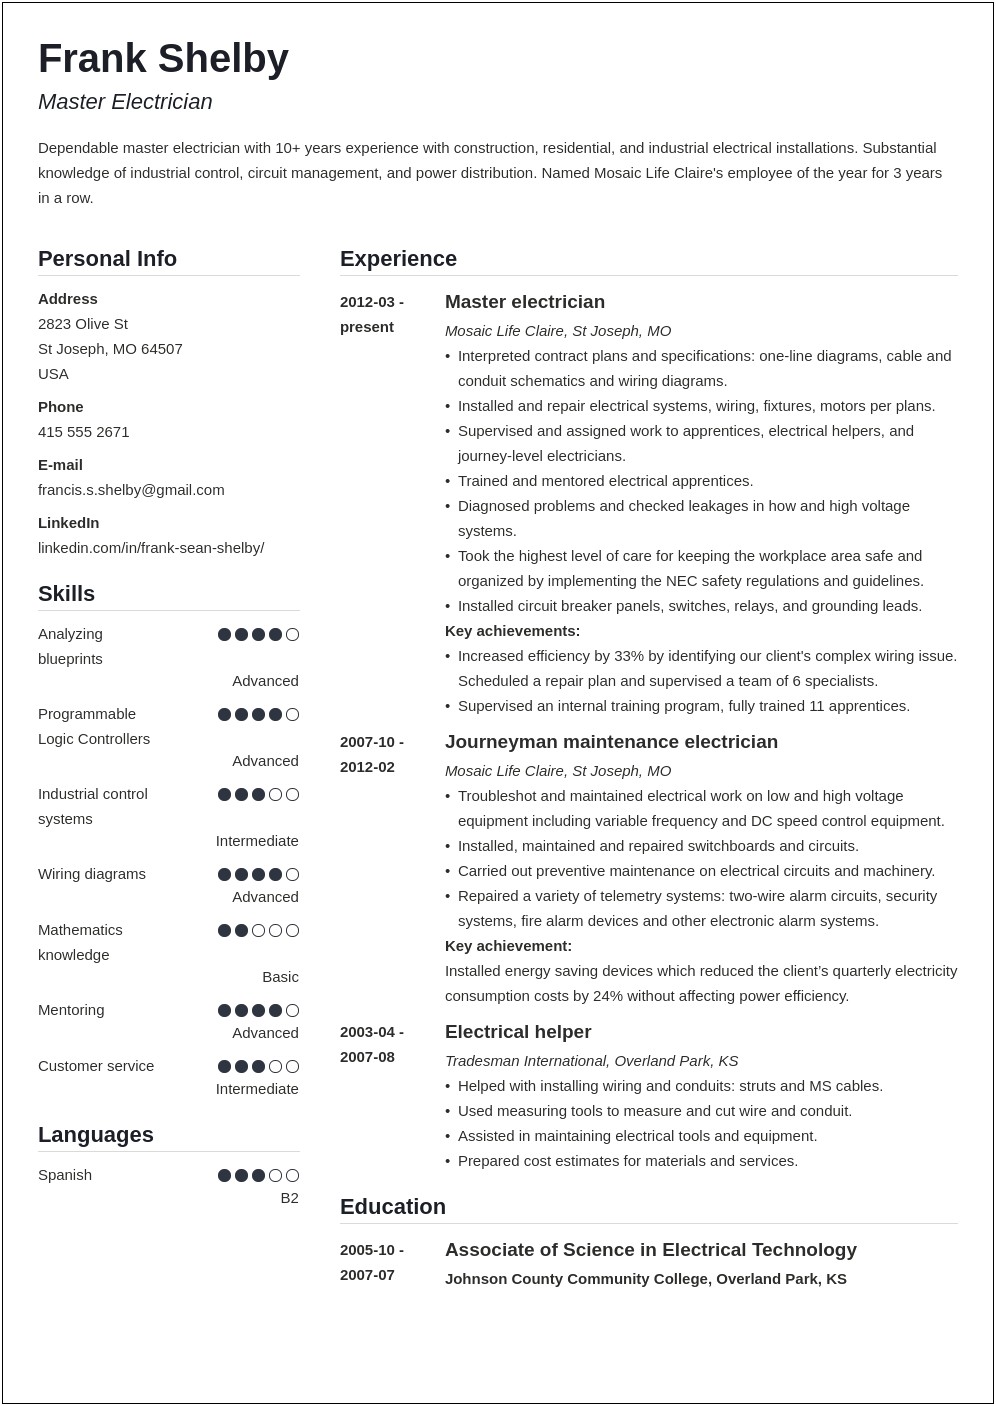 Adjectives To Describe Yourself On A Resume Summary